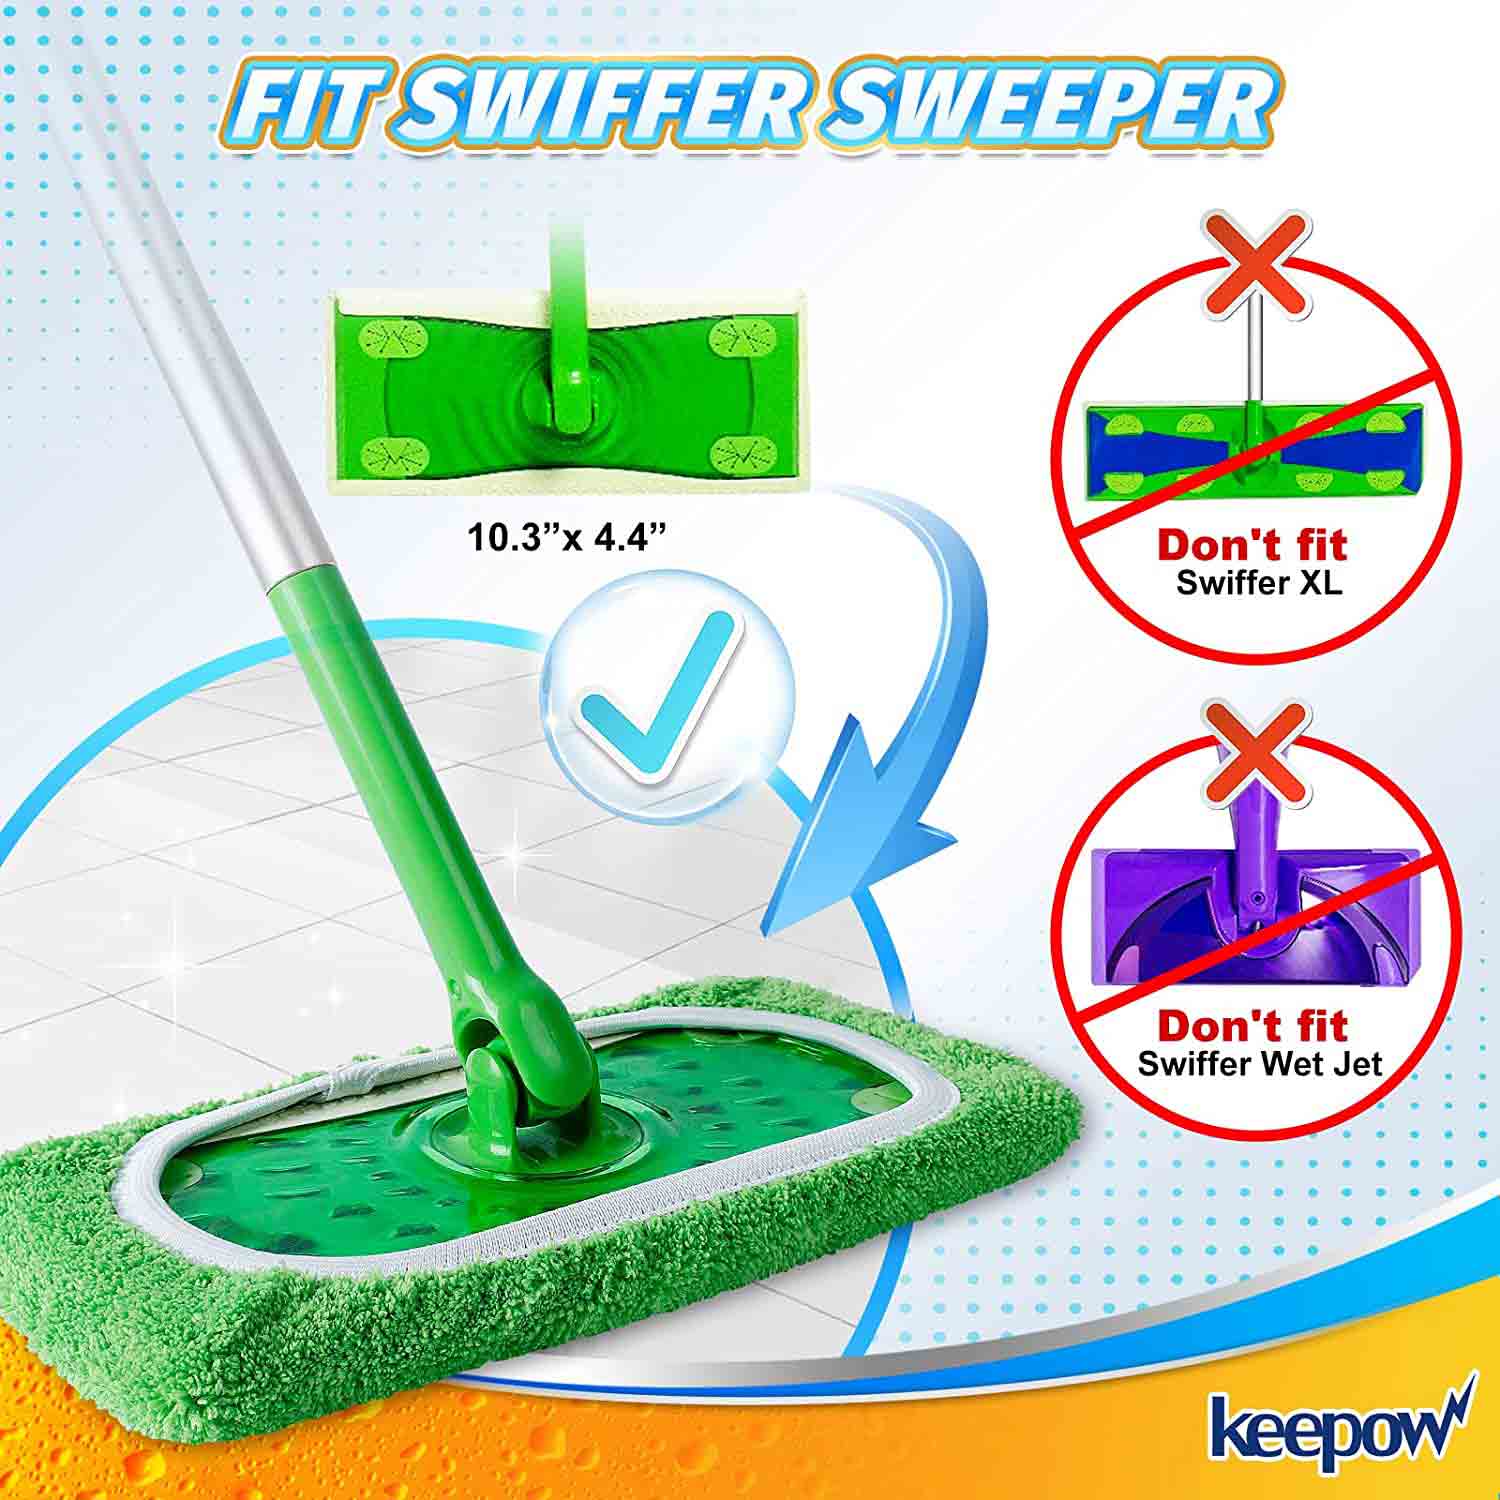 KEEPOW Reusable Wet Pads Refills Compatible with Swiffer Sweeper Mop, Dry Sweeping Cloths, Washable Microfiber Wet Mopping Cloths for Hardwood Floor Cleaning, 2 Pack (Mop is Not Included)